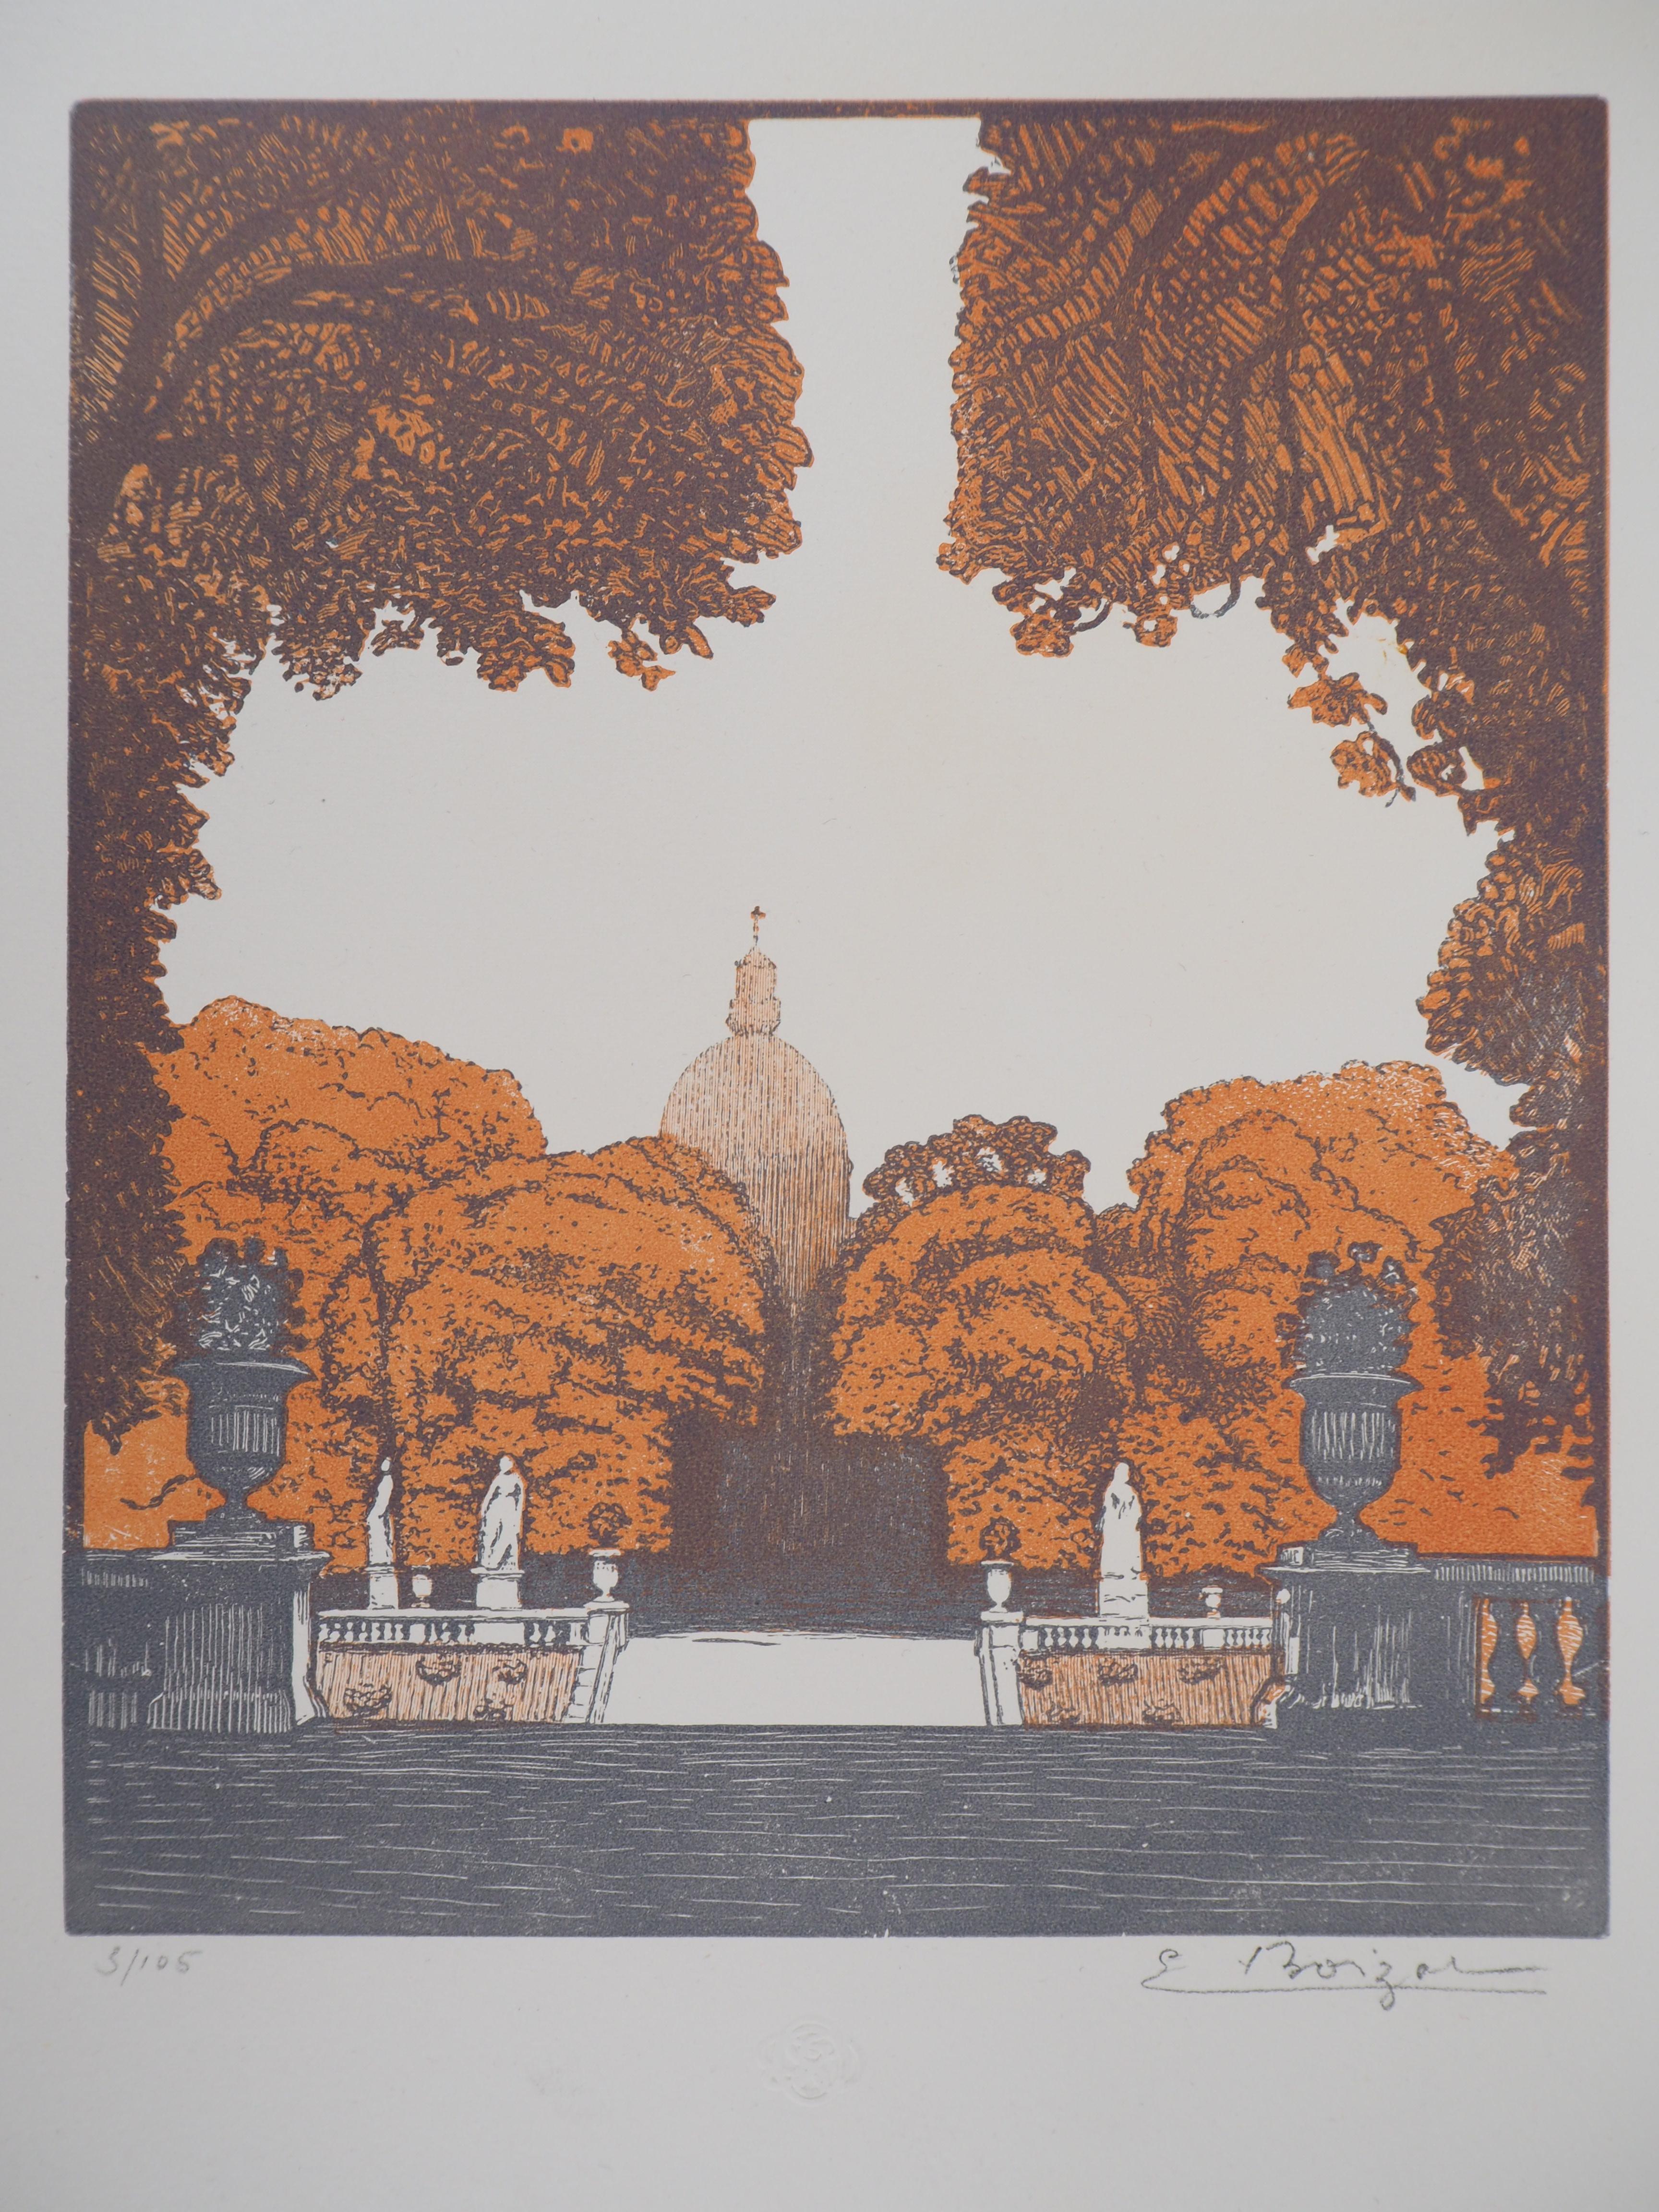 Emile BOIZOT Landscape Print - Paris, Luxembourg Garden  - Original wooodcut, Handsigned and numbered /105